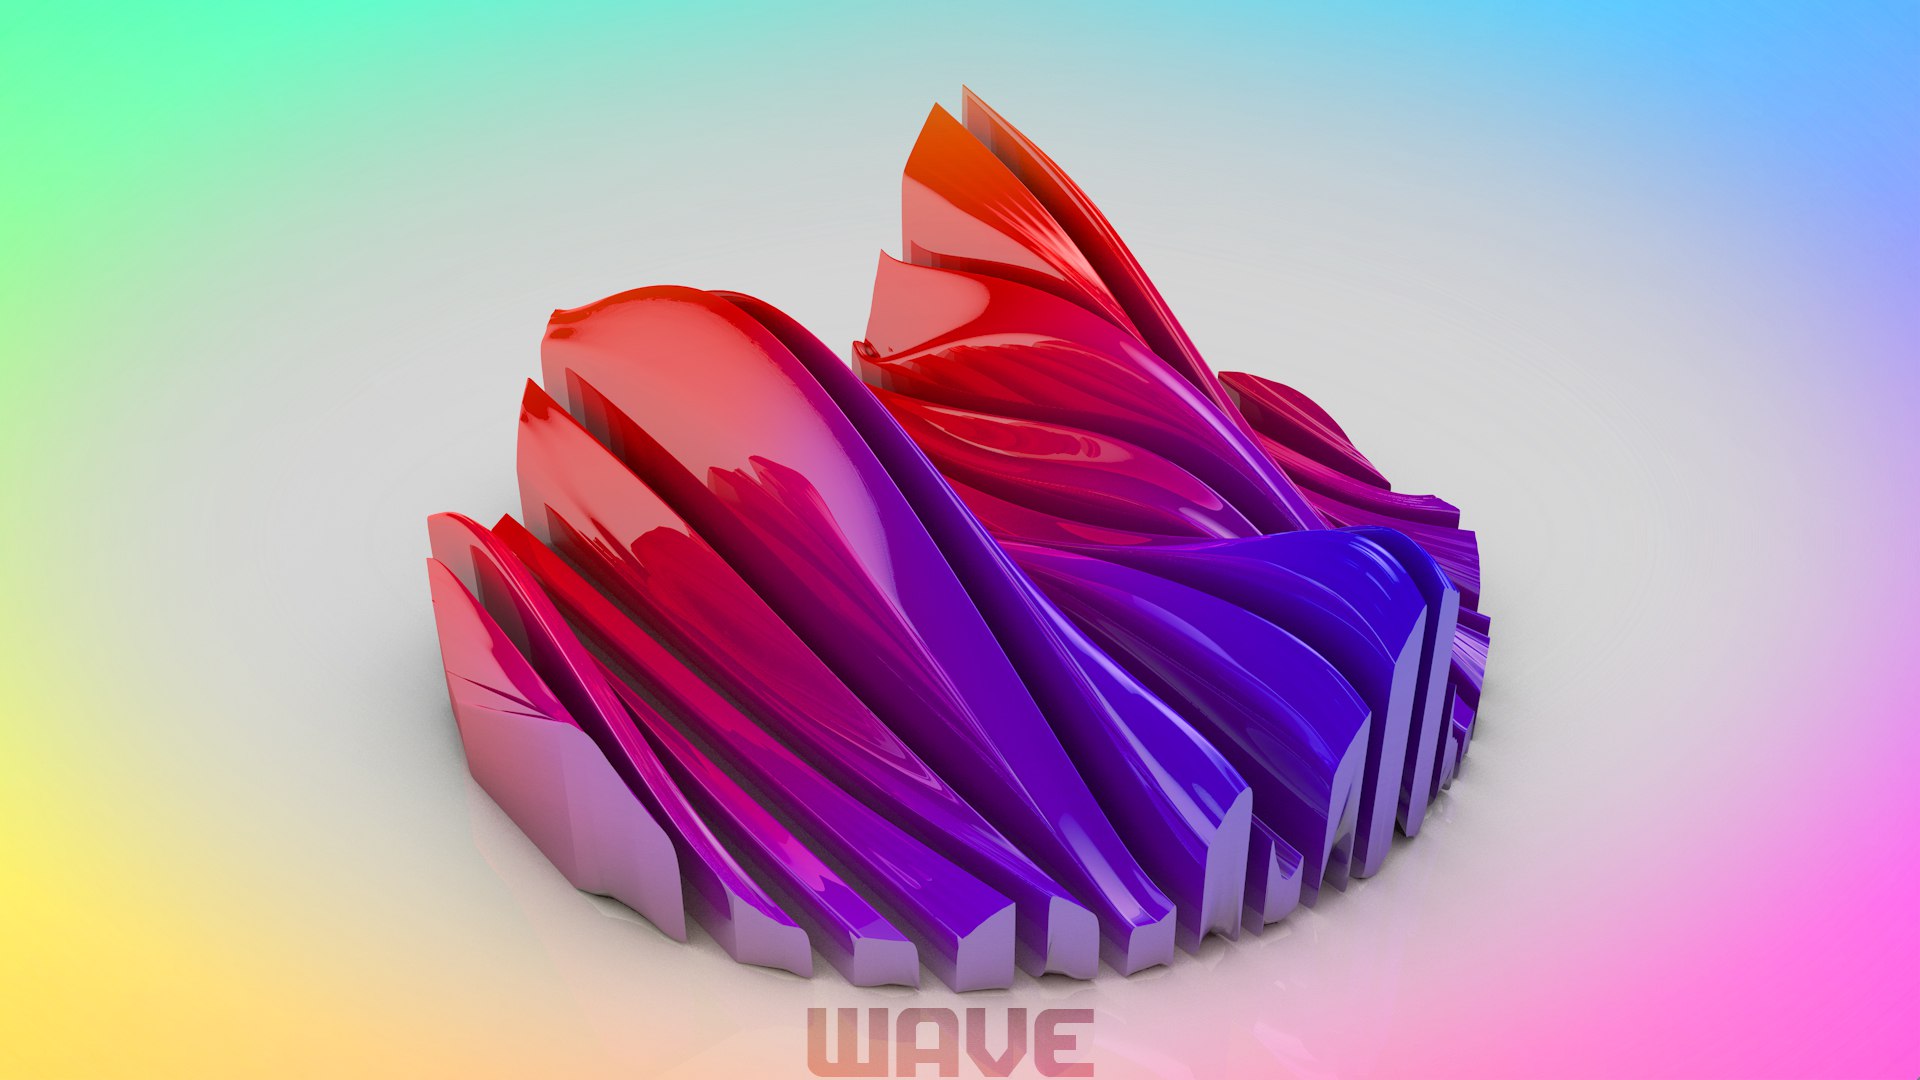 General 1920x1080 waveforms waves colorful gradient abstract